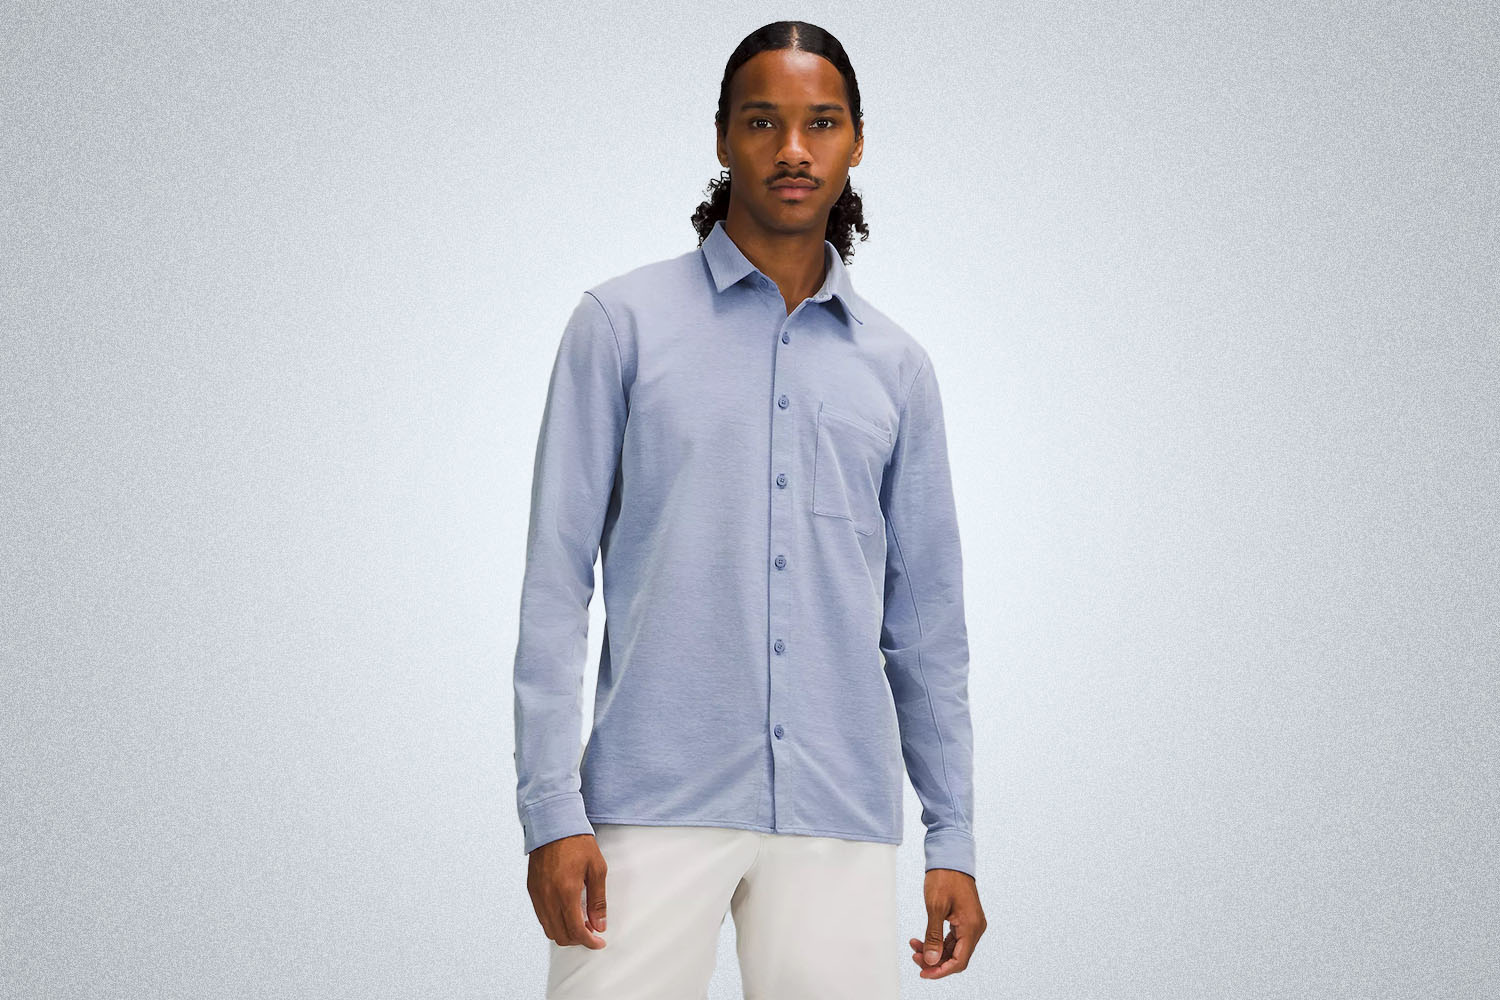 a model in a light blue button u pshirt from lululemon on a grey background